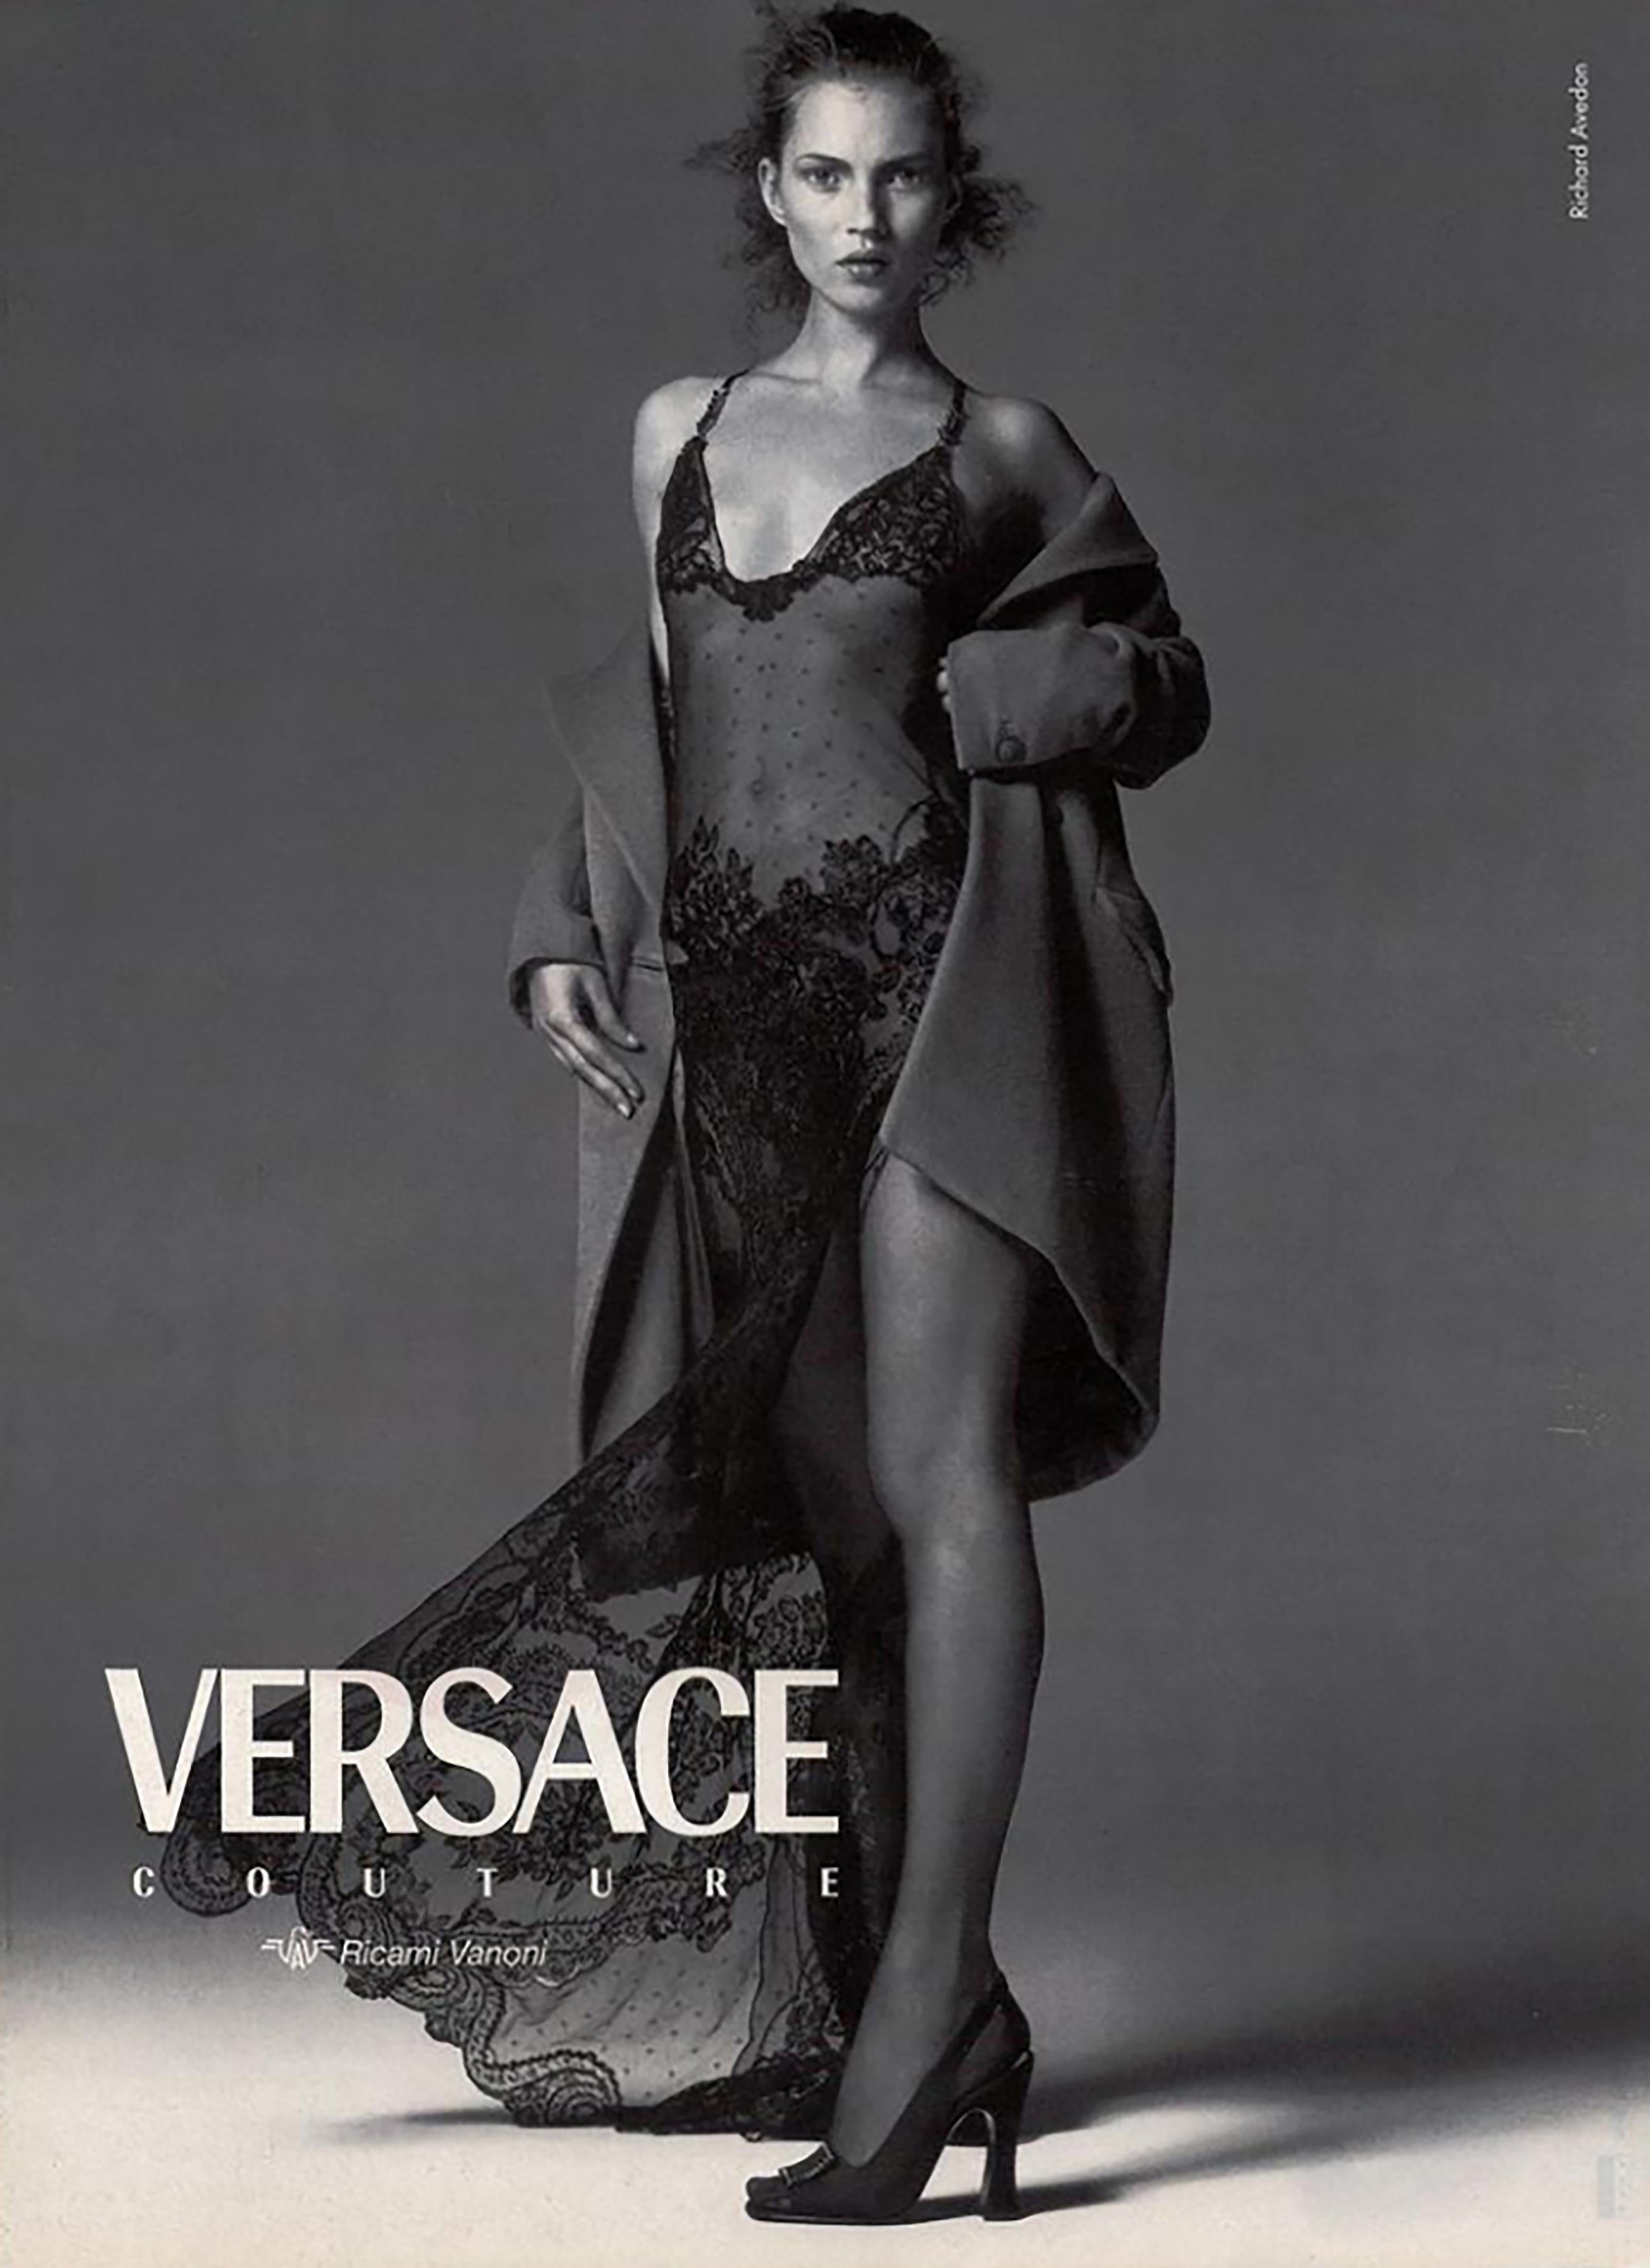 A/W 1996 Gianni Versace Black Oroton Chainmail and Lace Gown 9